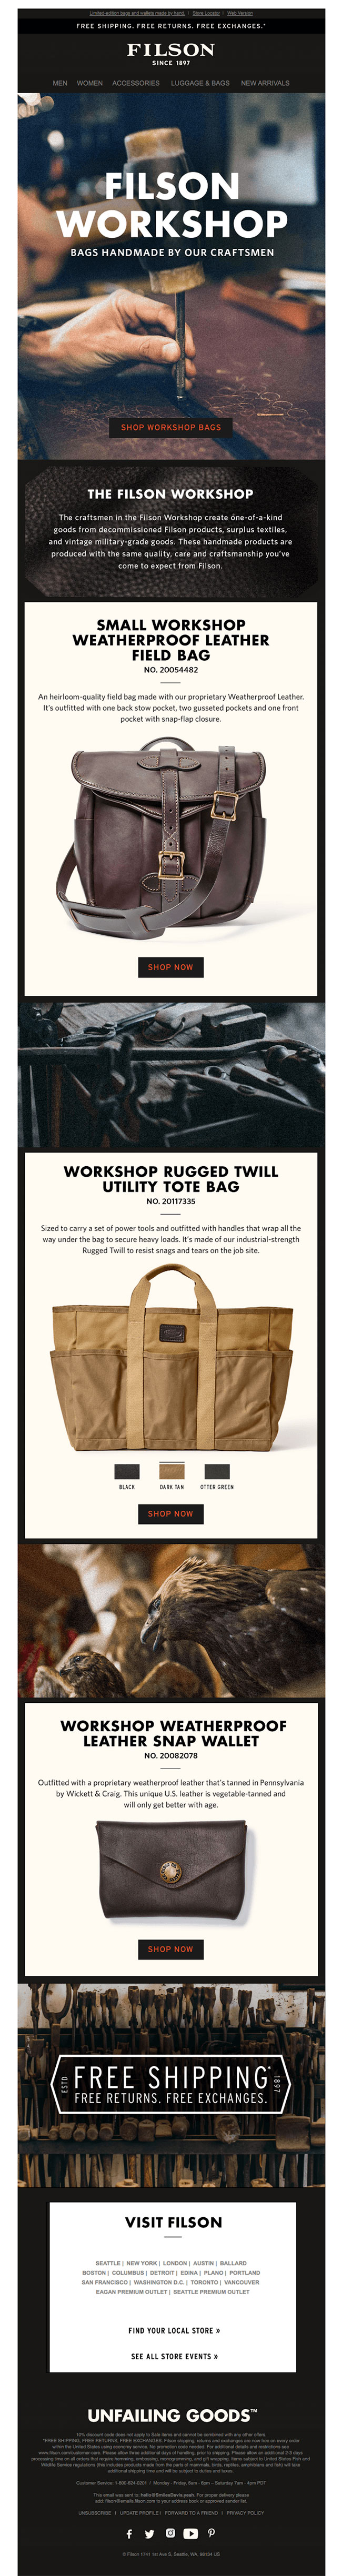 Filson makes you feel like you’re in the workshop